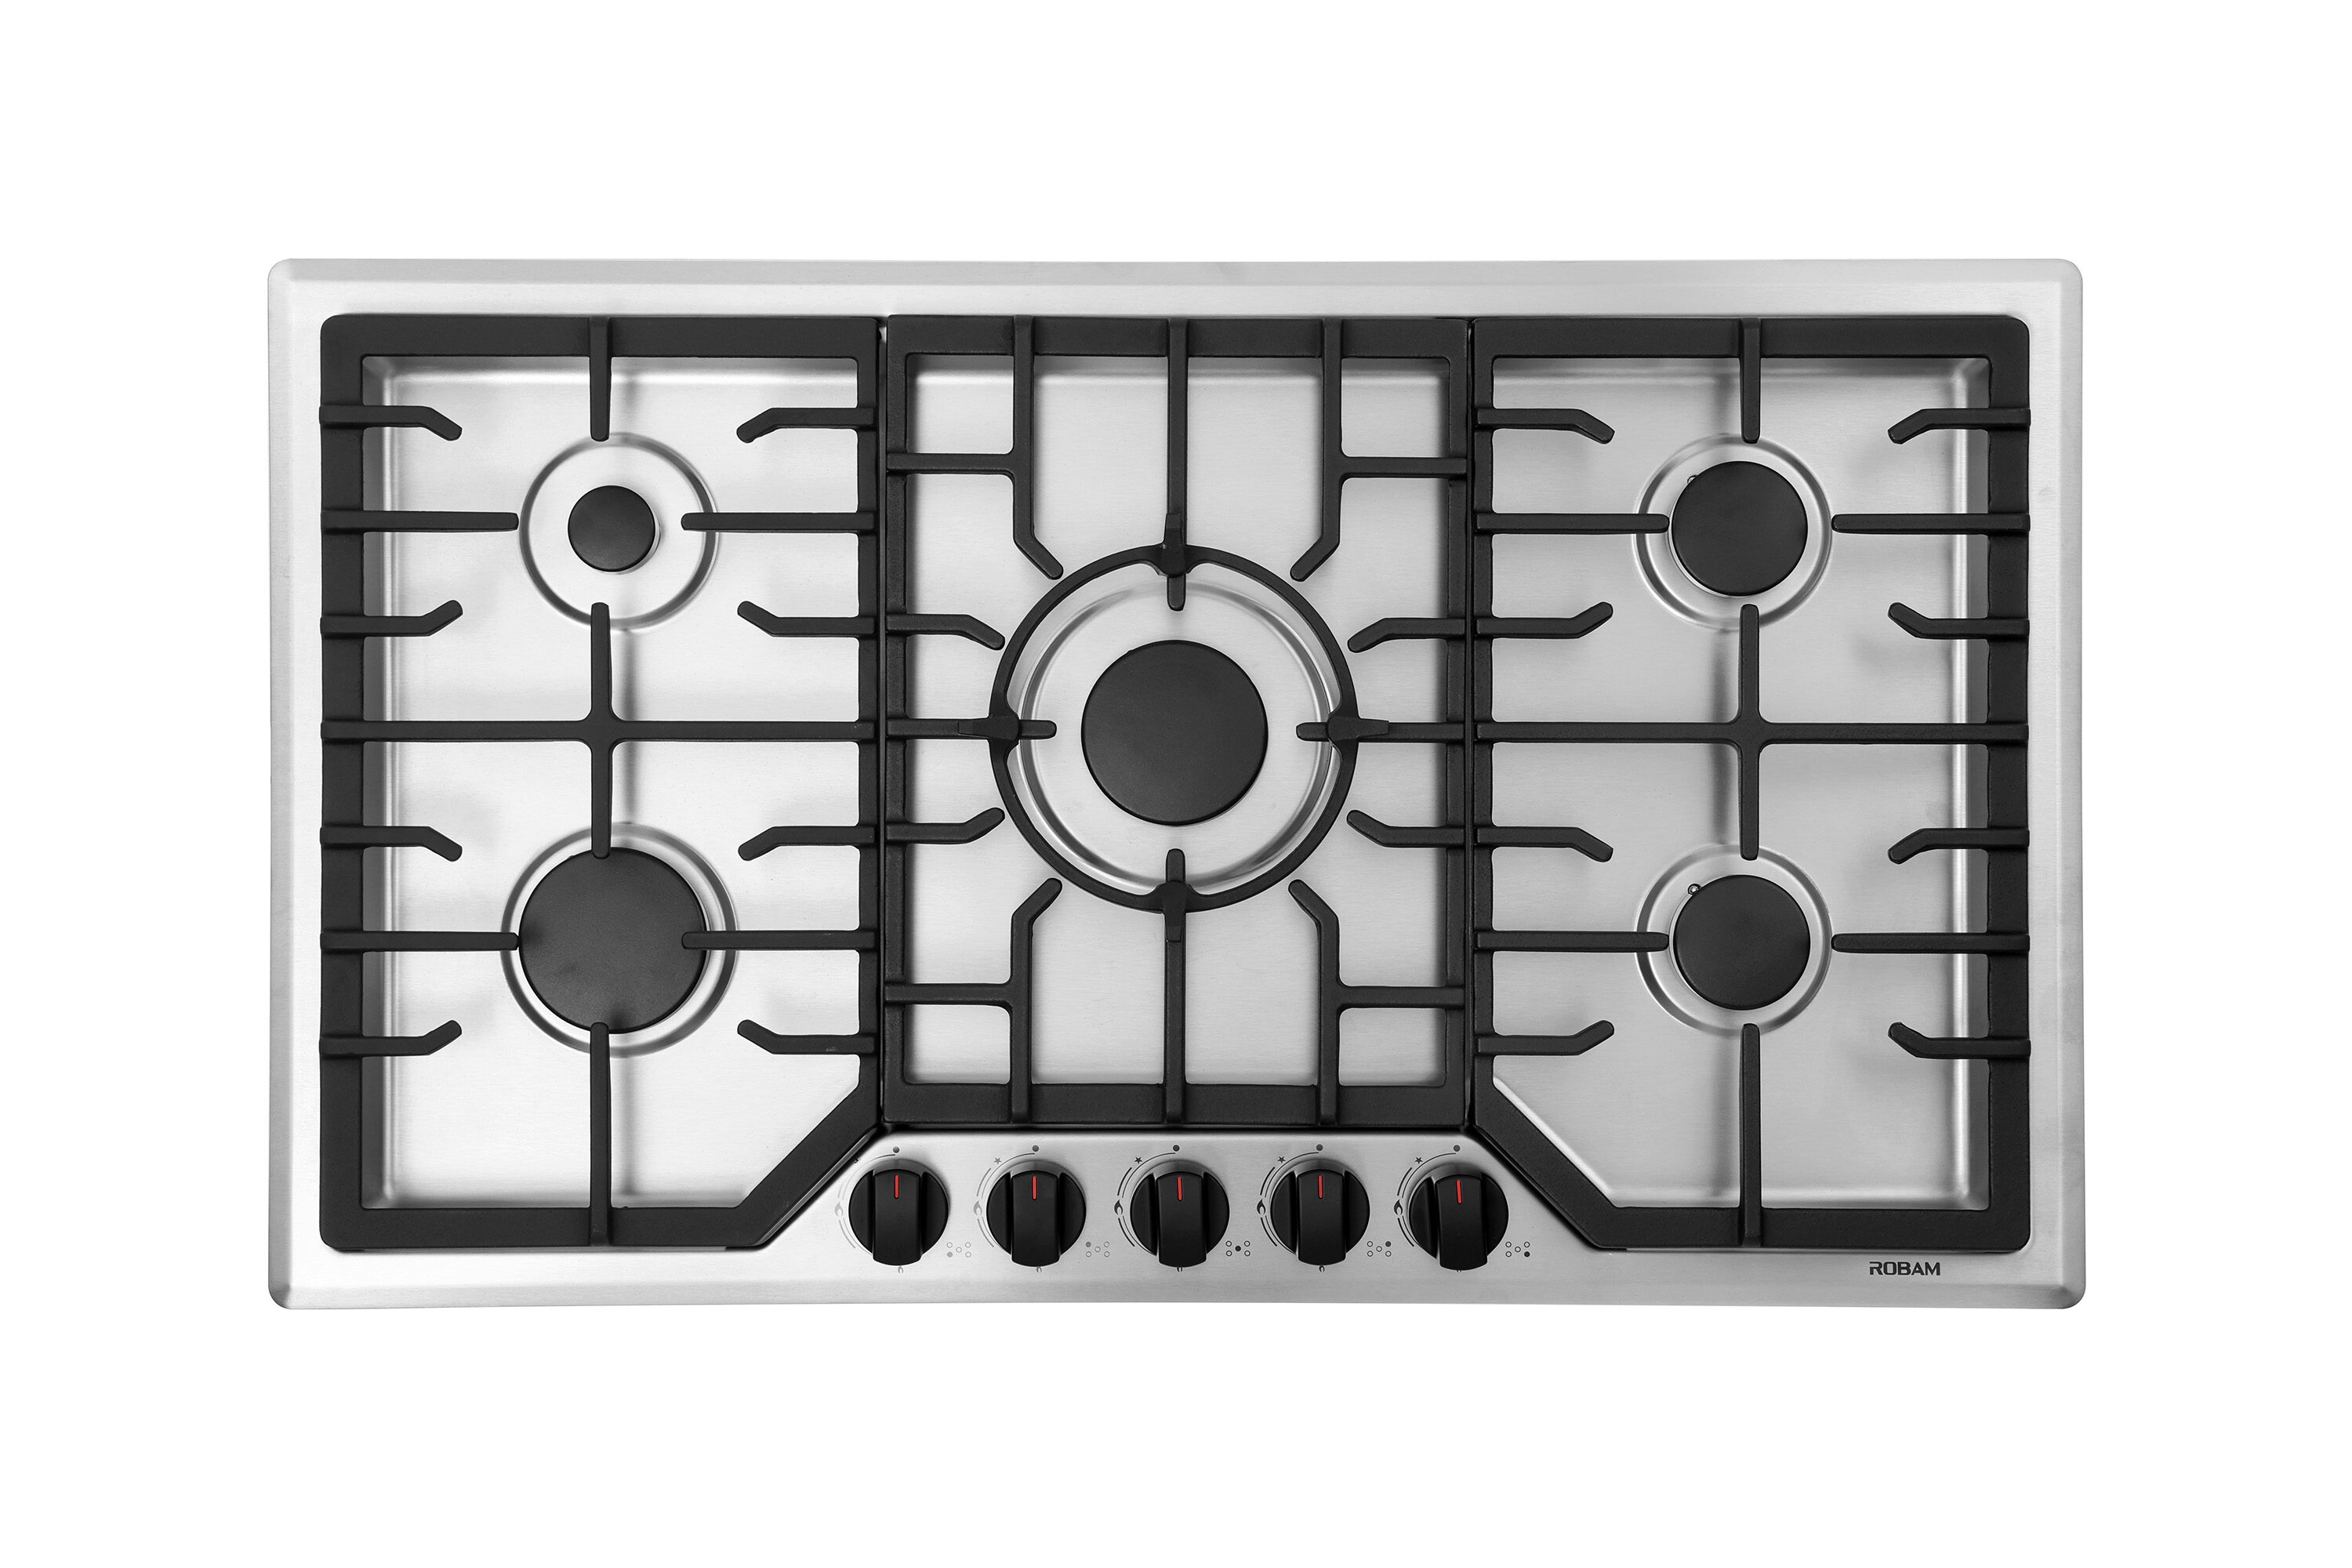 36-in 5 Burners Stainless Steel Gas Cooktop | -7G9H50 - ROBAM ROBAM-7G9H50